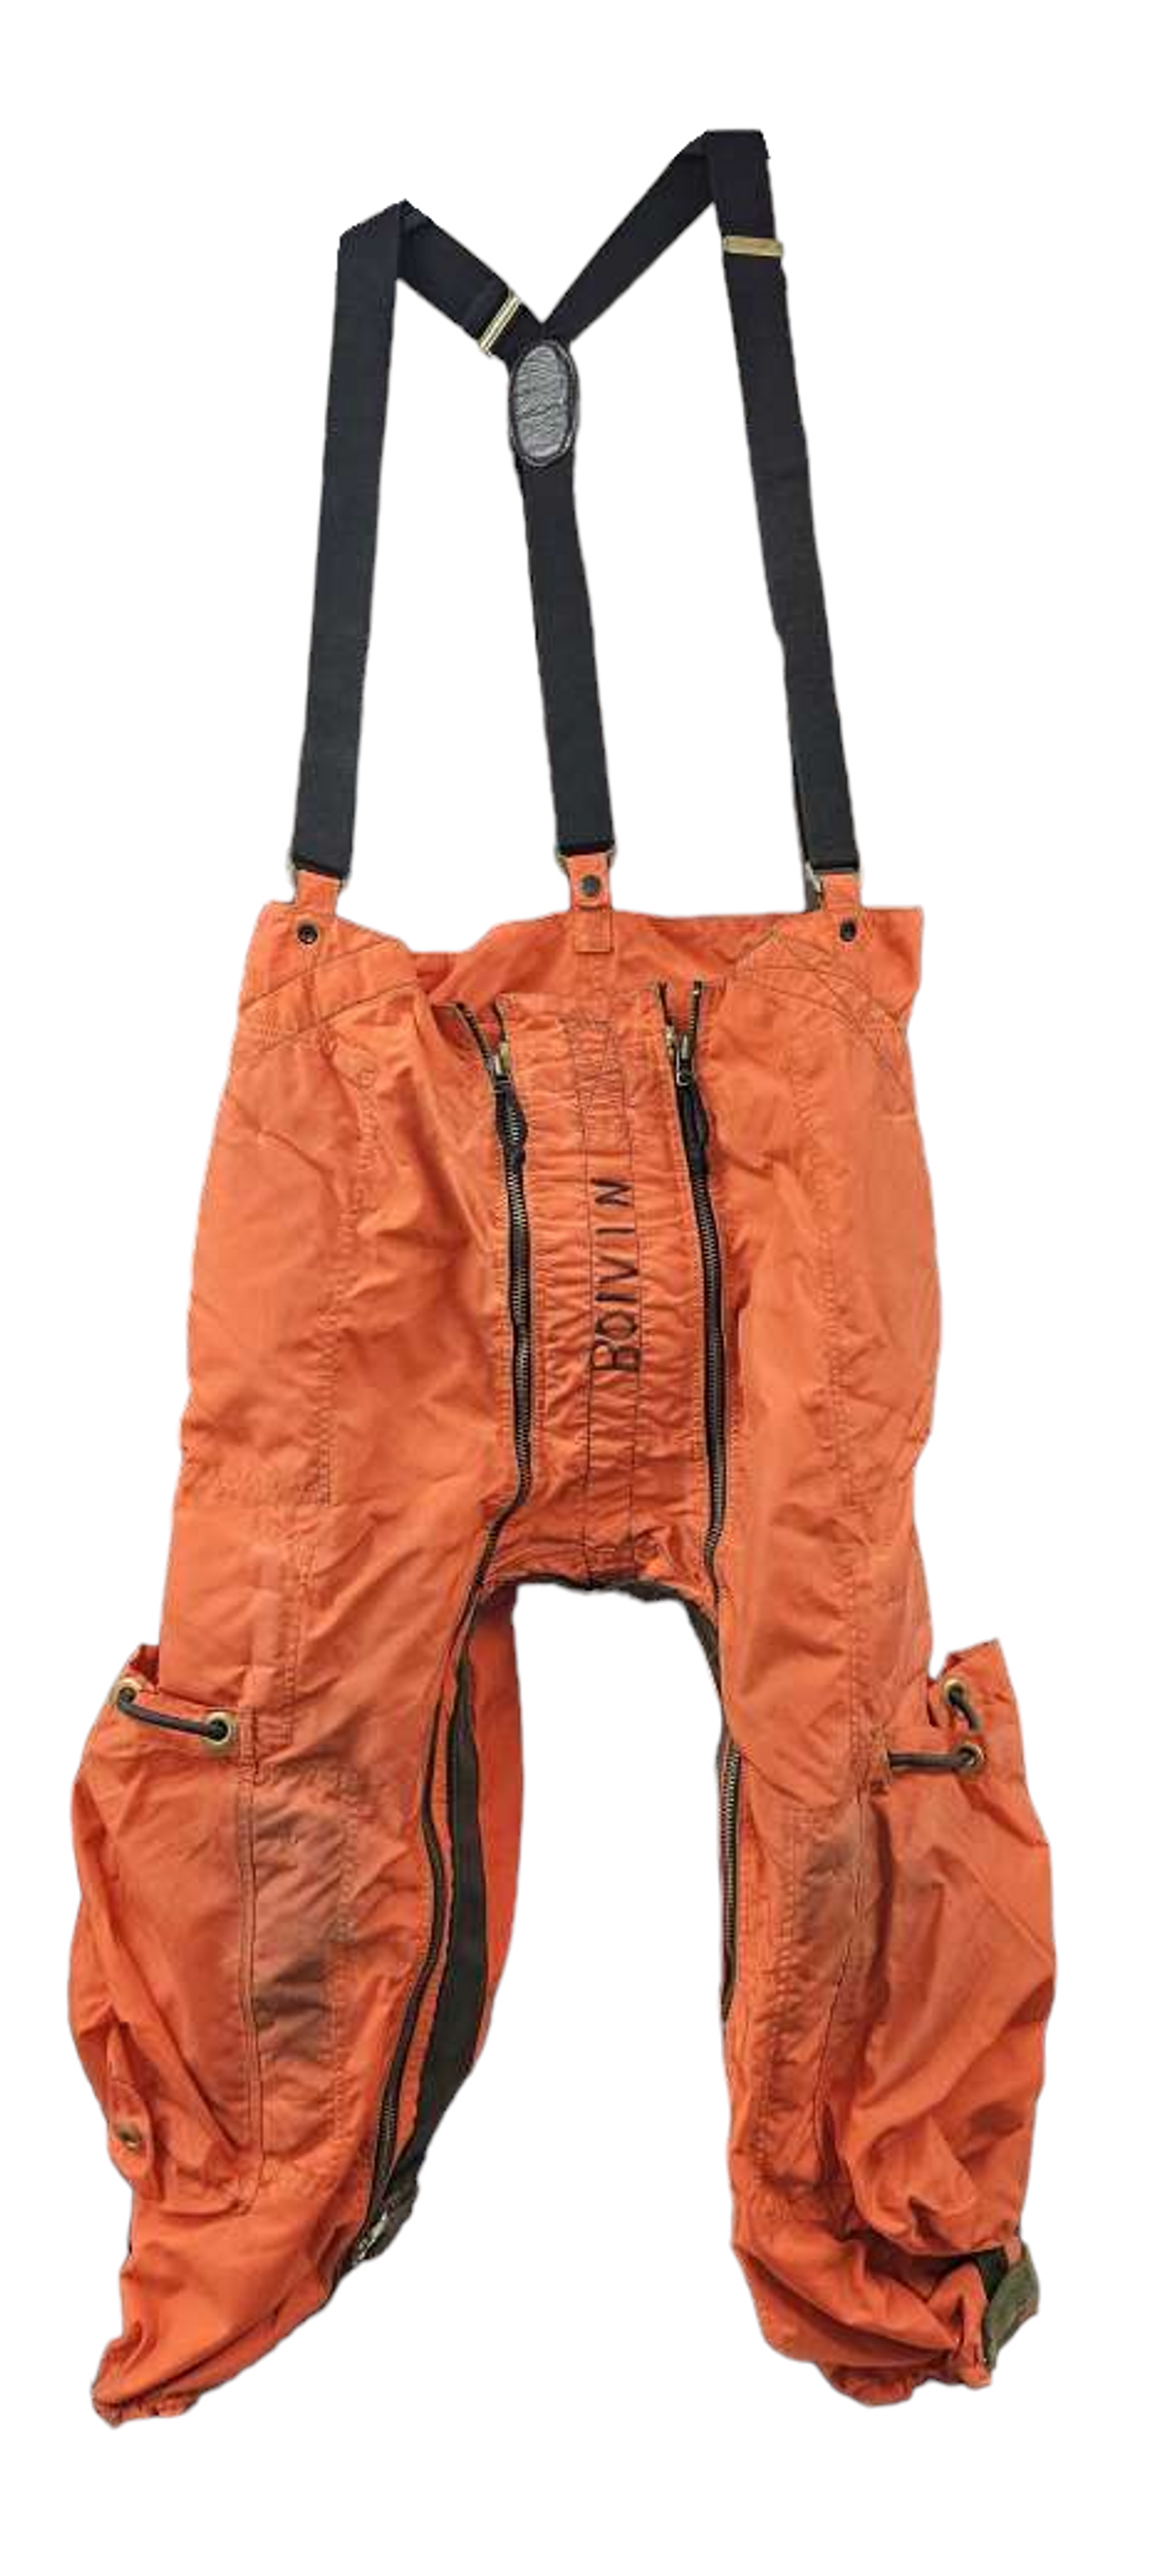 Canadian Armed Forces SAR-tech Pararescue Overalls - Small